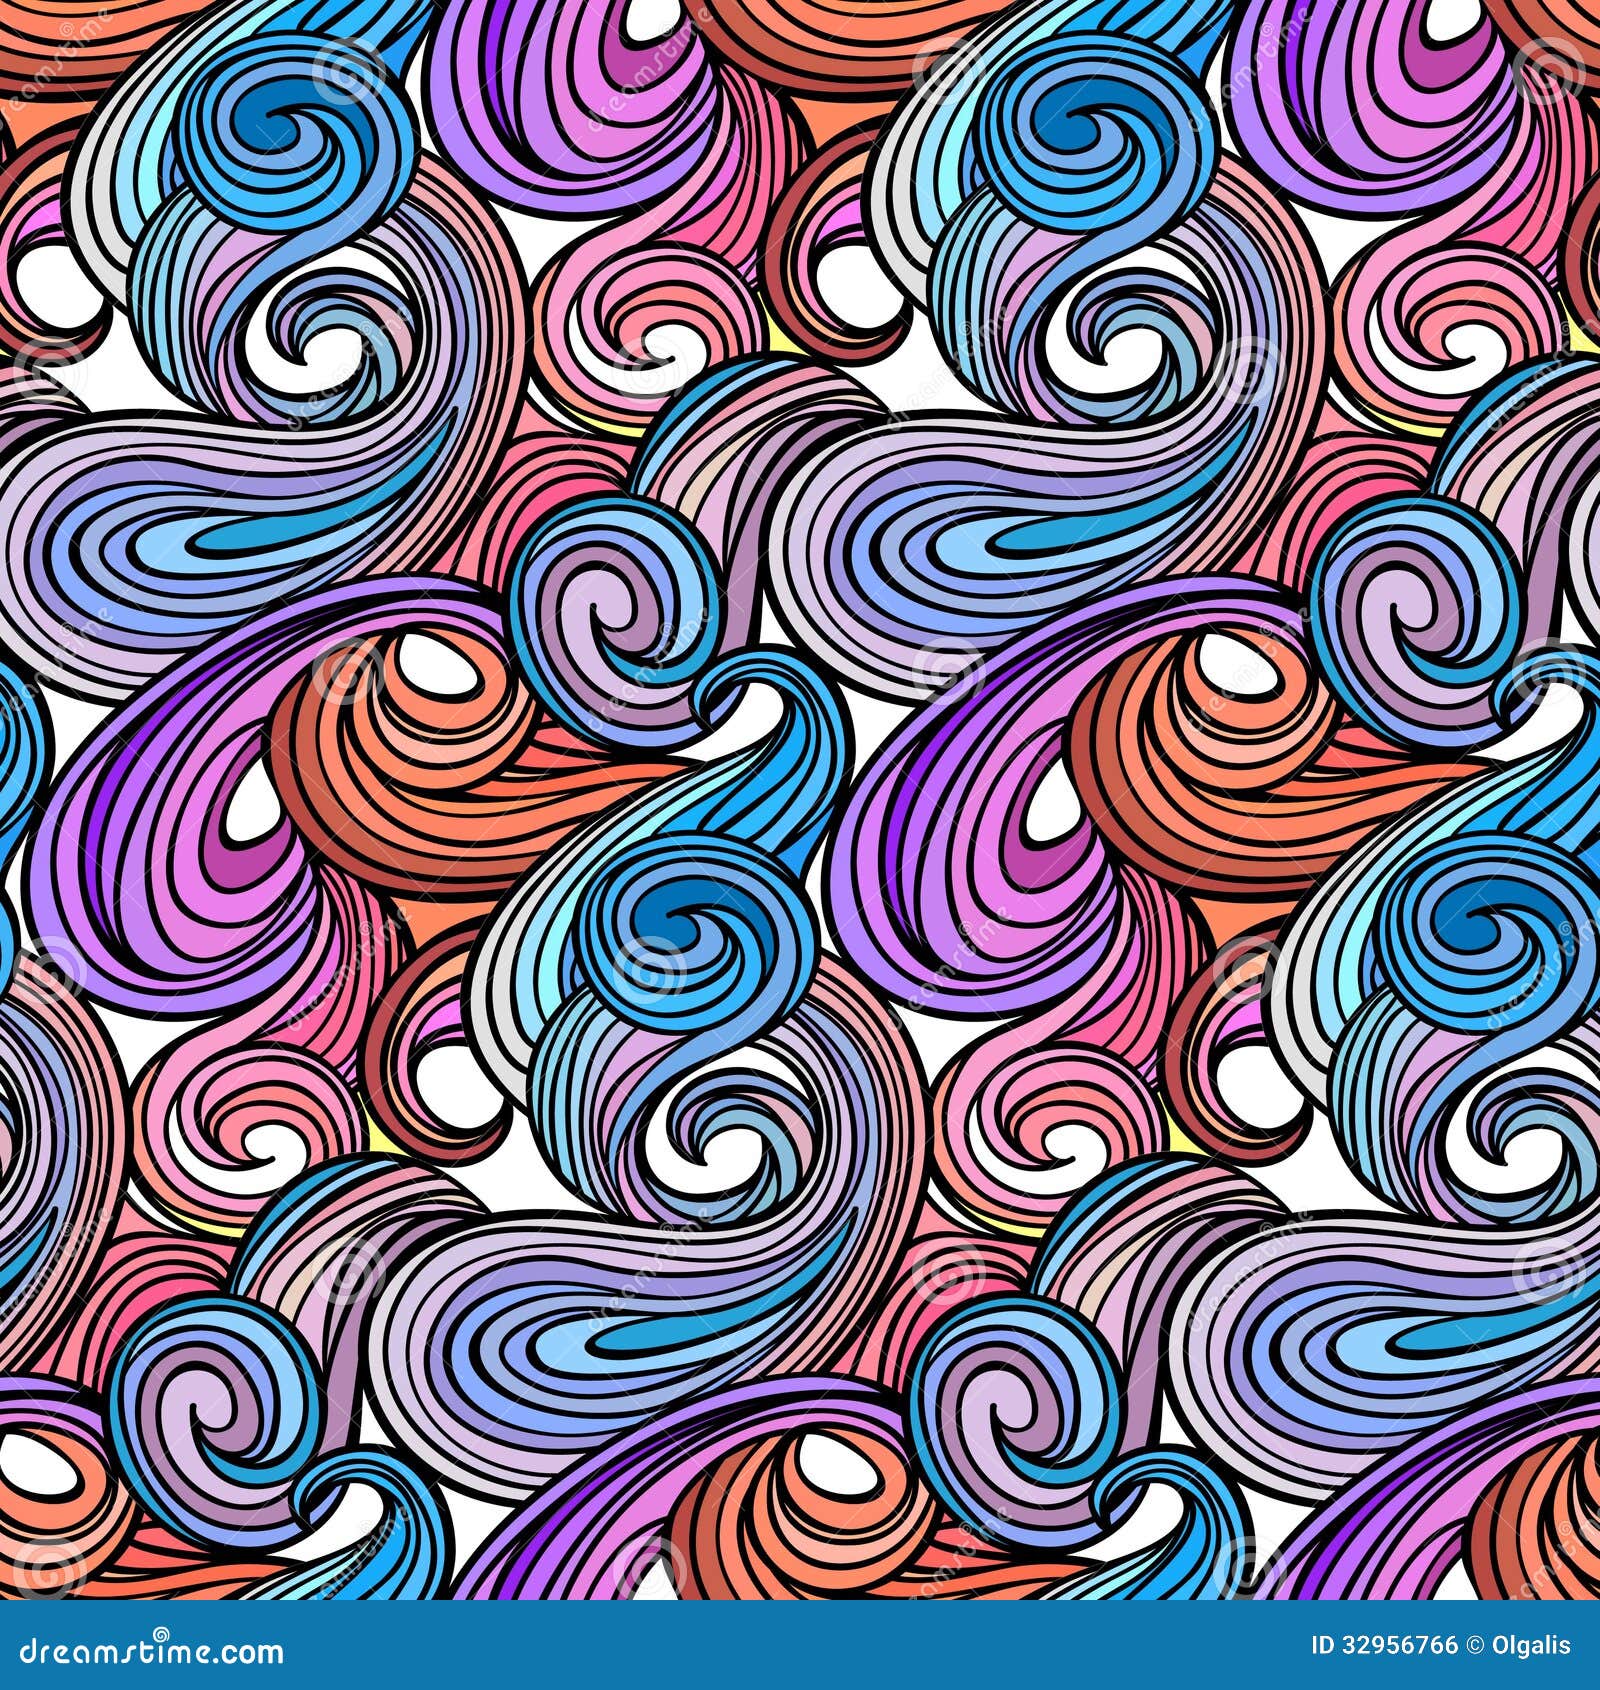 Seamless Abstract Curly Wave Pattern Royalty Free Stock Image Image